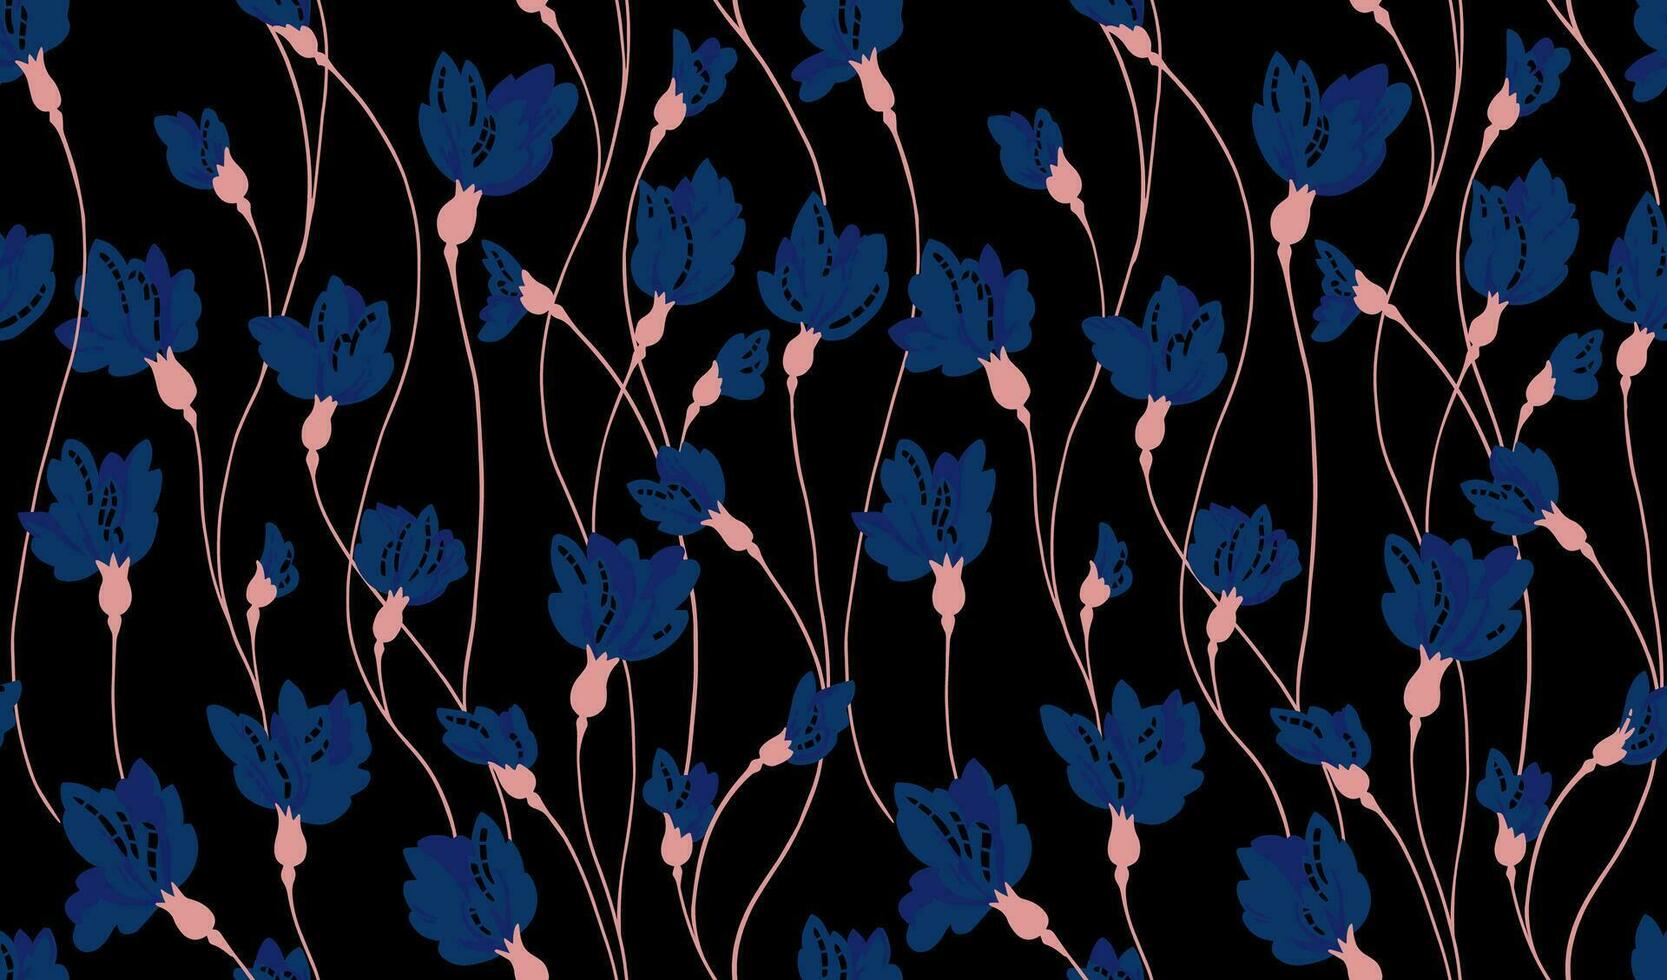 Seamless simple, abstract branches floral pattern. Vector hand drawn sketch. Creative ditsy flowers on a dark background. Design for fashion, textile, fabric, wallpaper, surface design